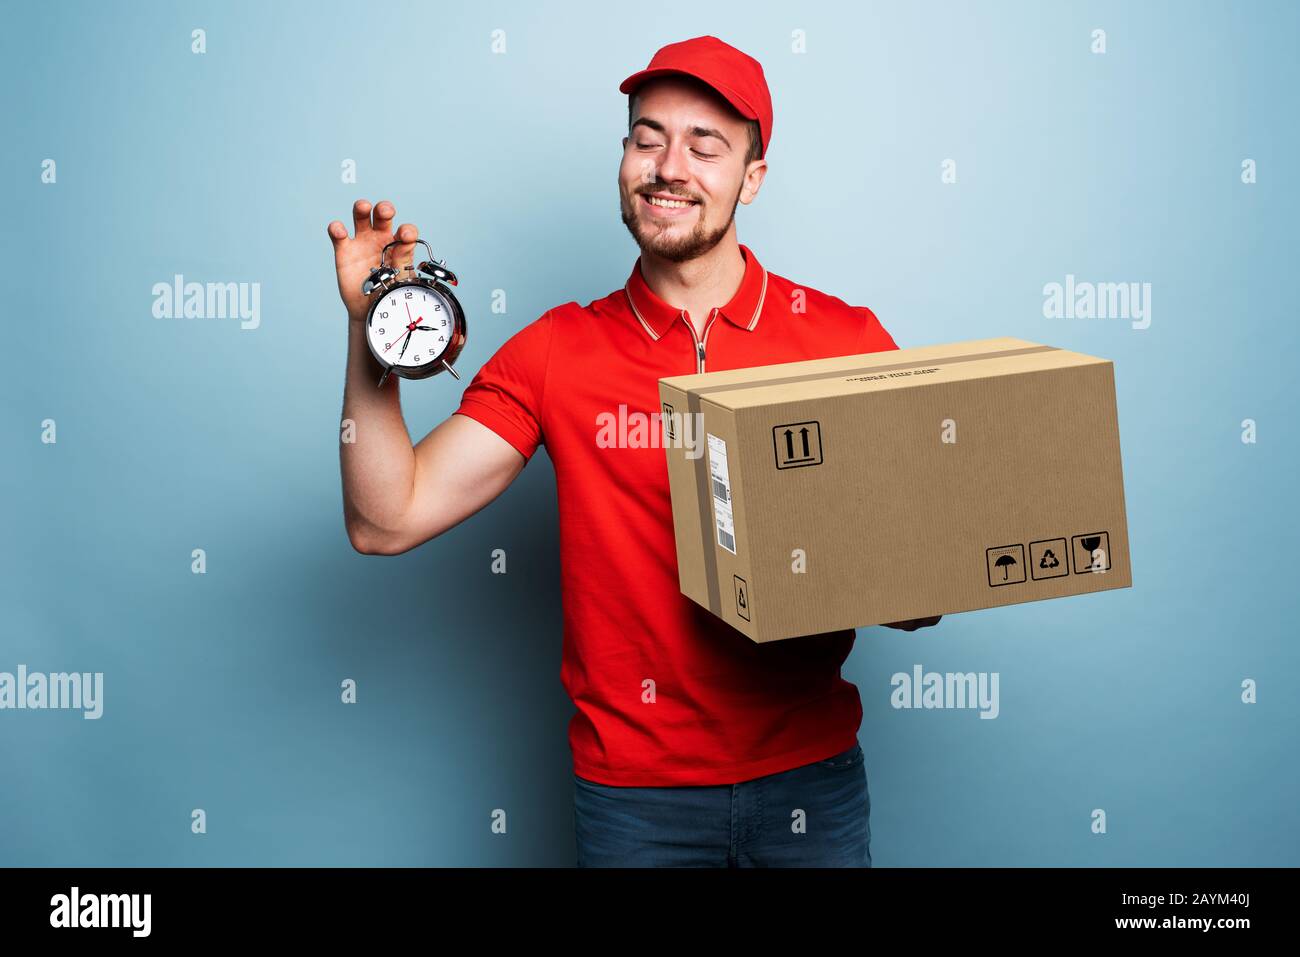 Courier is punctual to deliver the package. Emotional expression. Cyan background Stock Photo